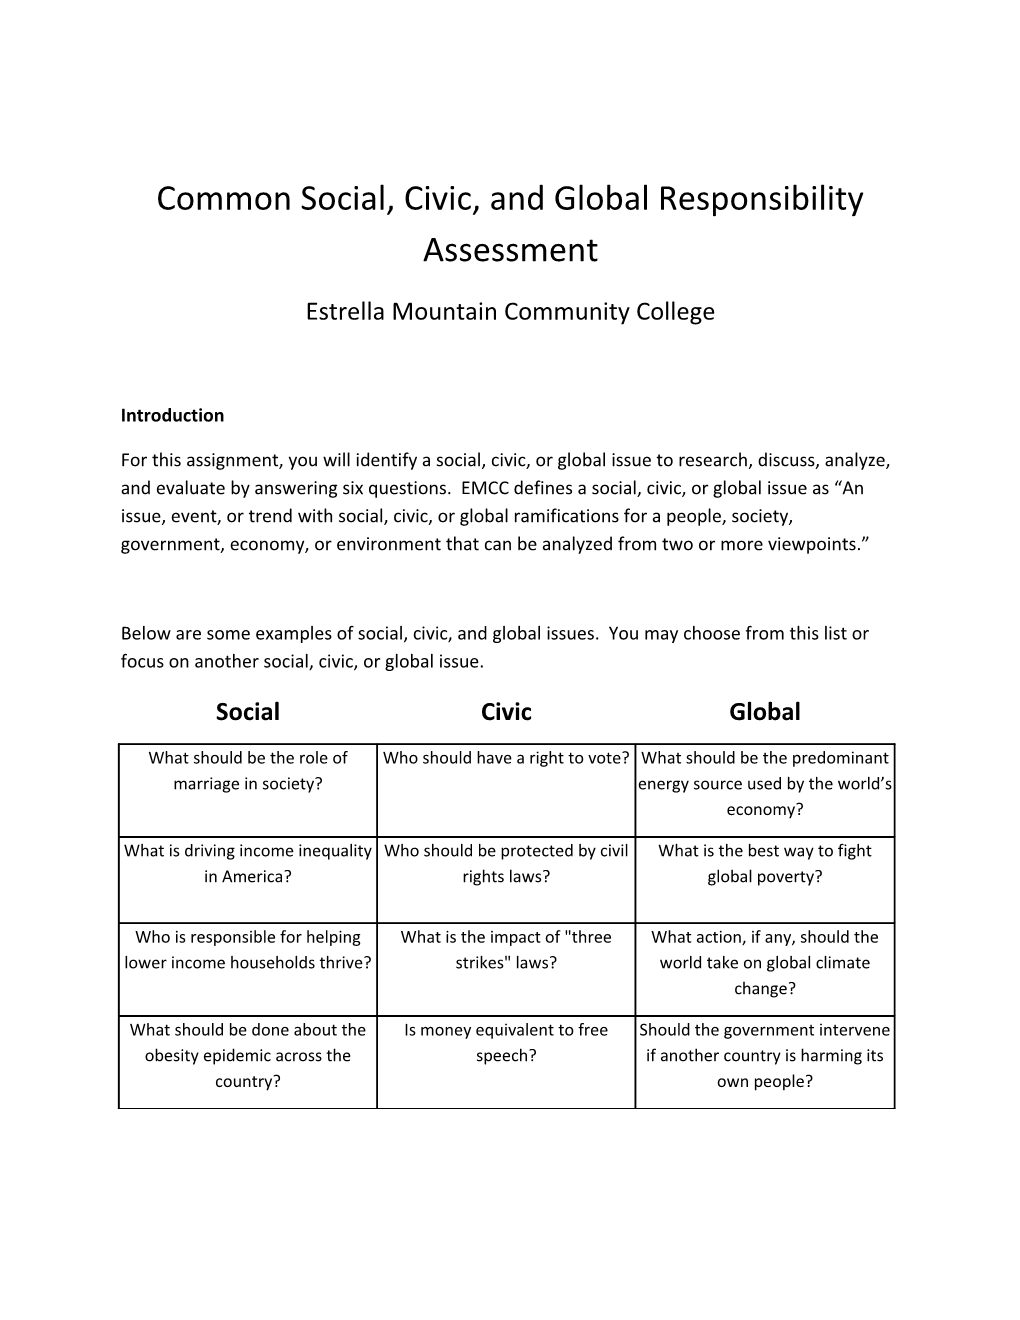 Common Social, Civic, and Global Responsibility Assessment